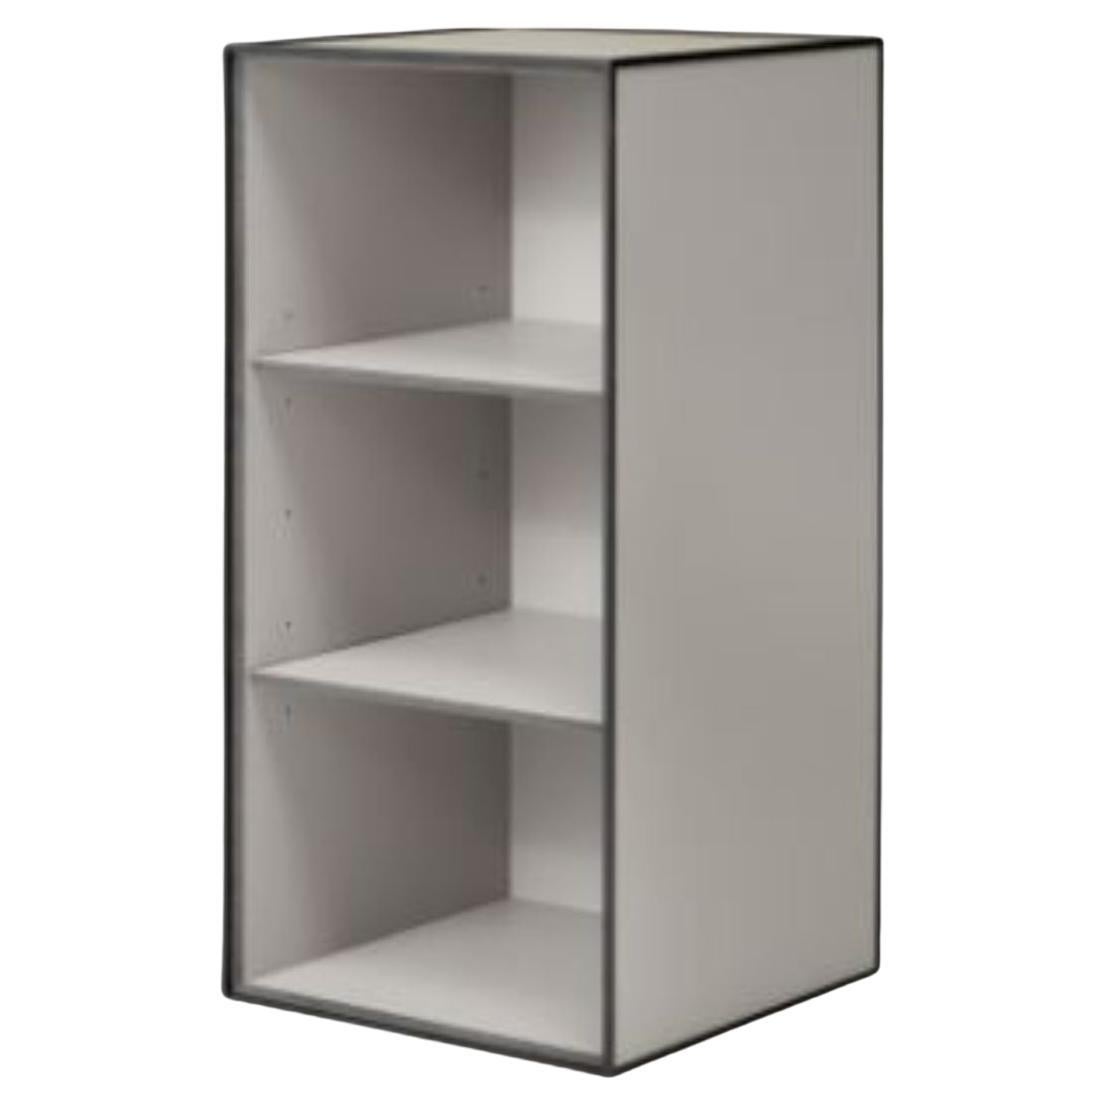 70 Sand Frame Box with 2 Shelves by Lassen